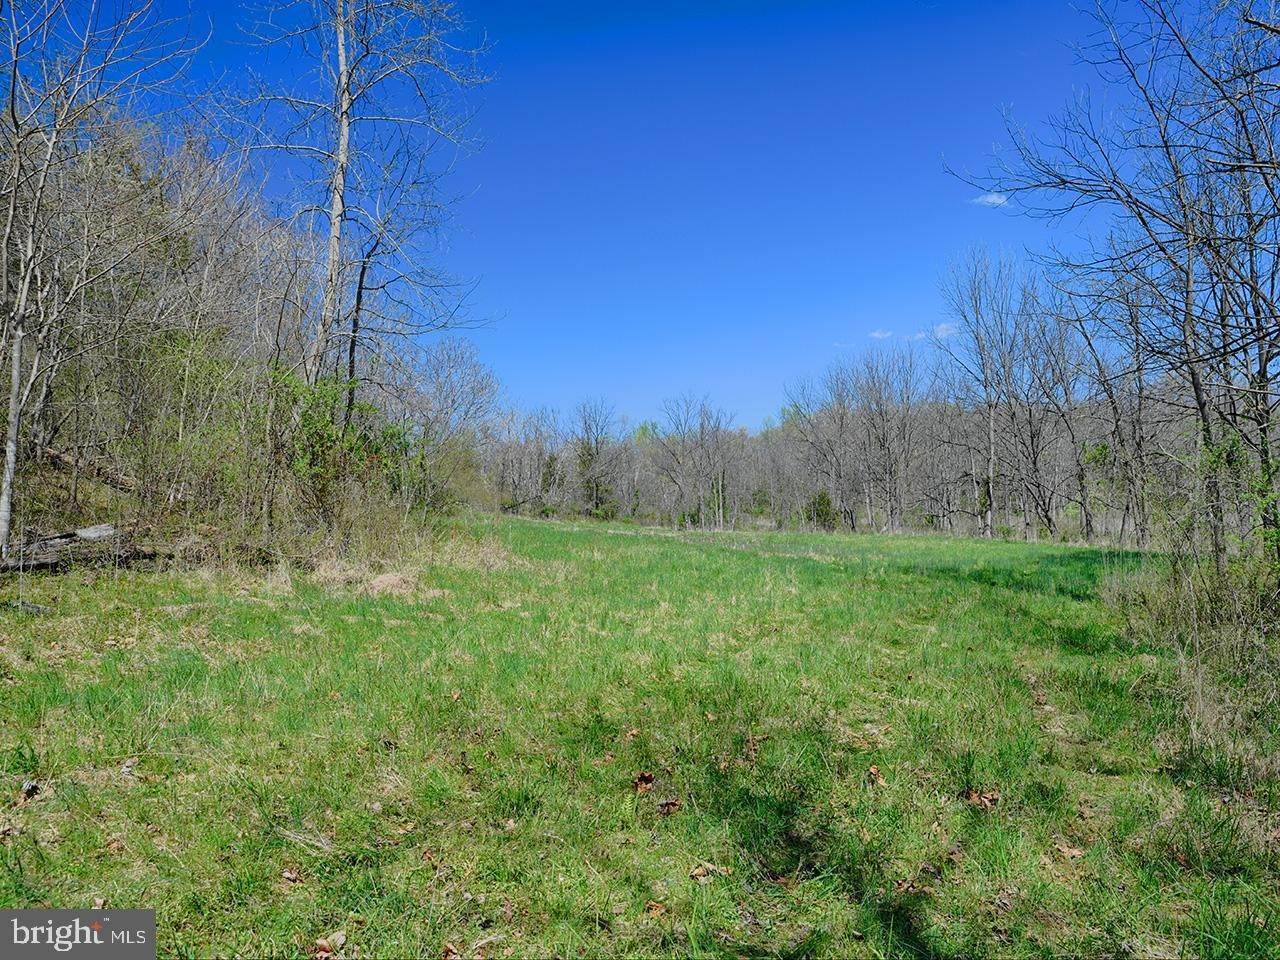 10. Land for Sale at Faber, Virginia 22938 United States